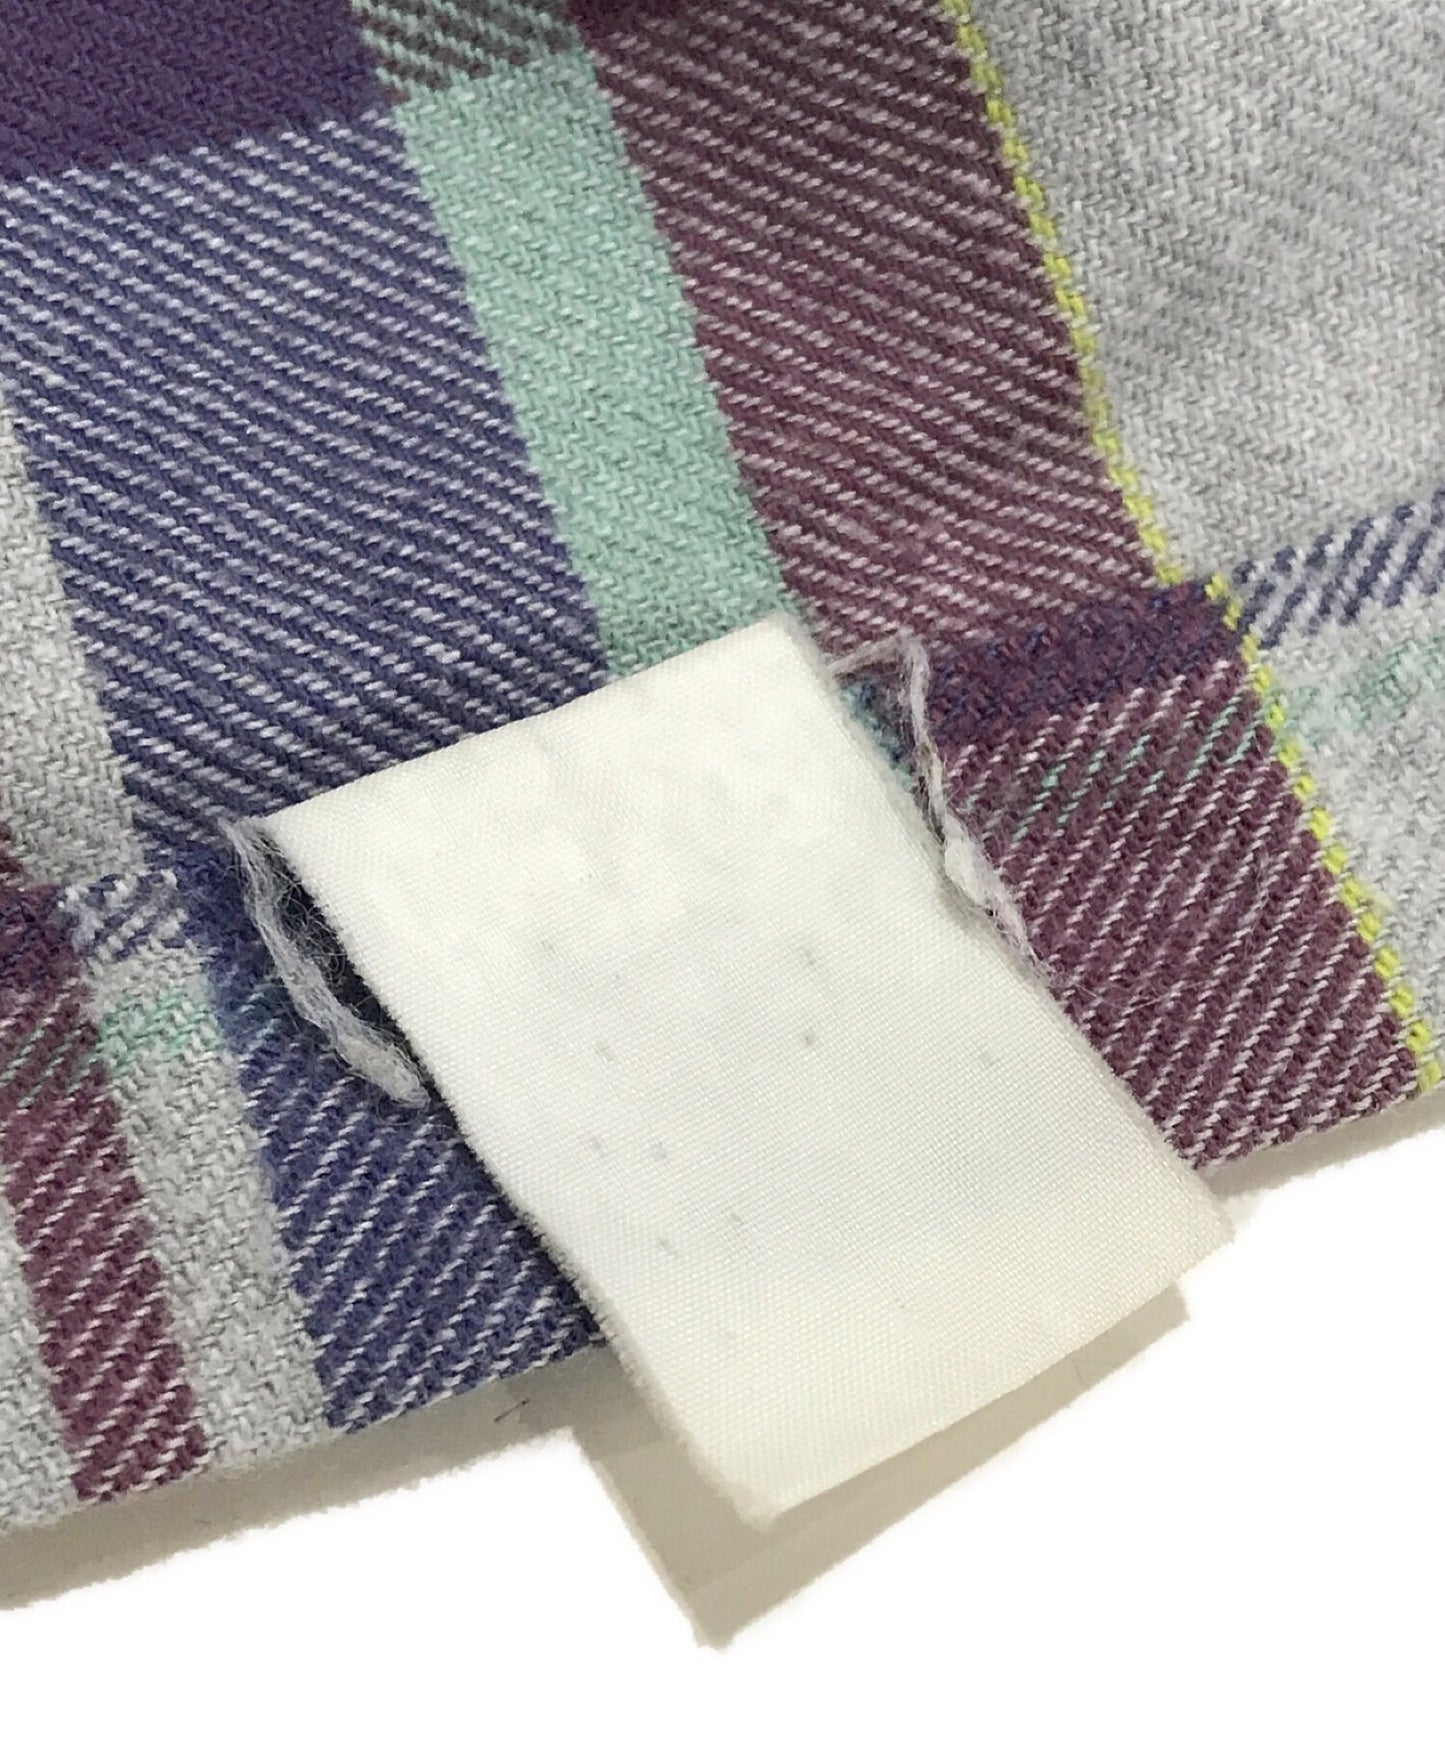 [Pre-owned] ISSEY MIYAKE checked shirt